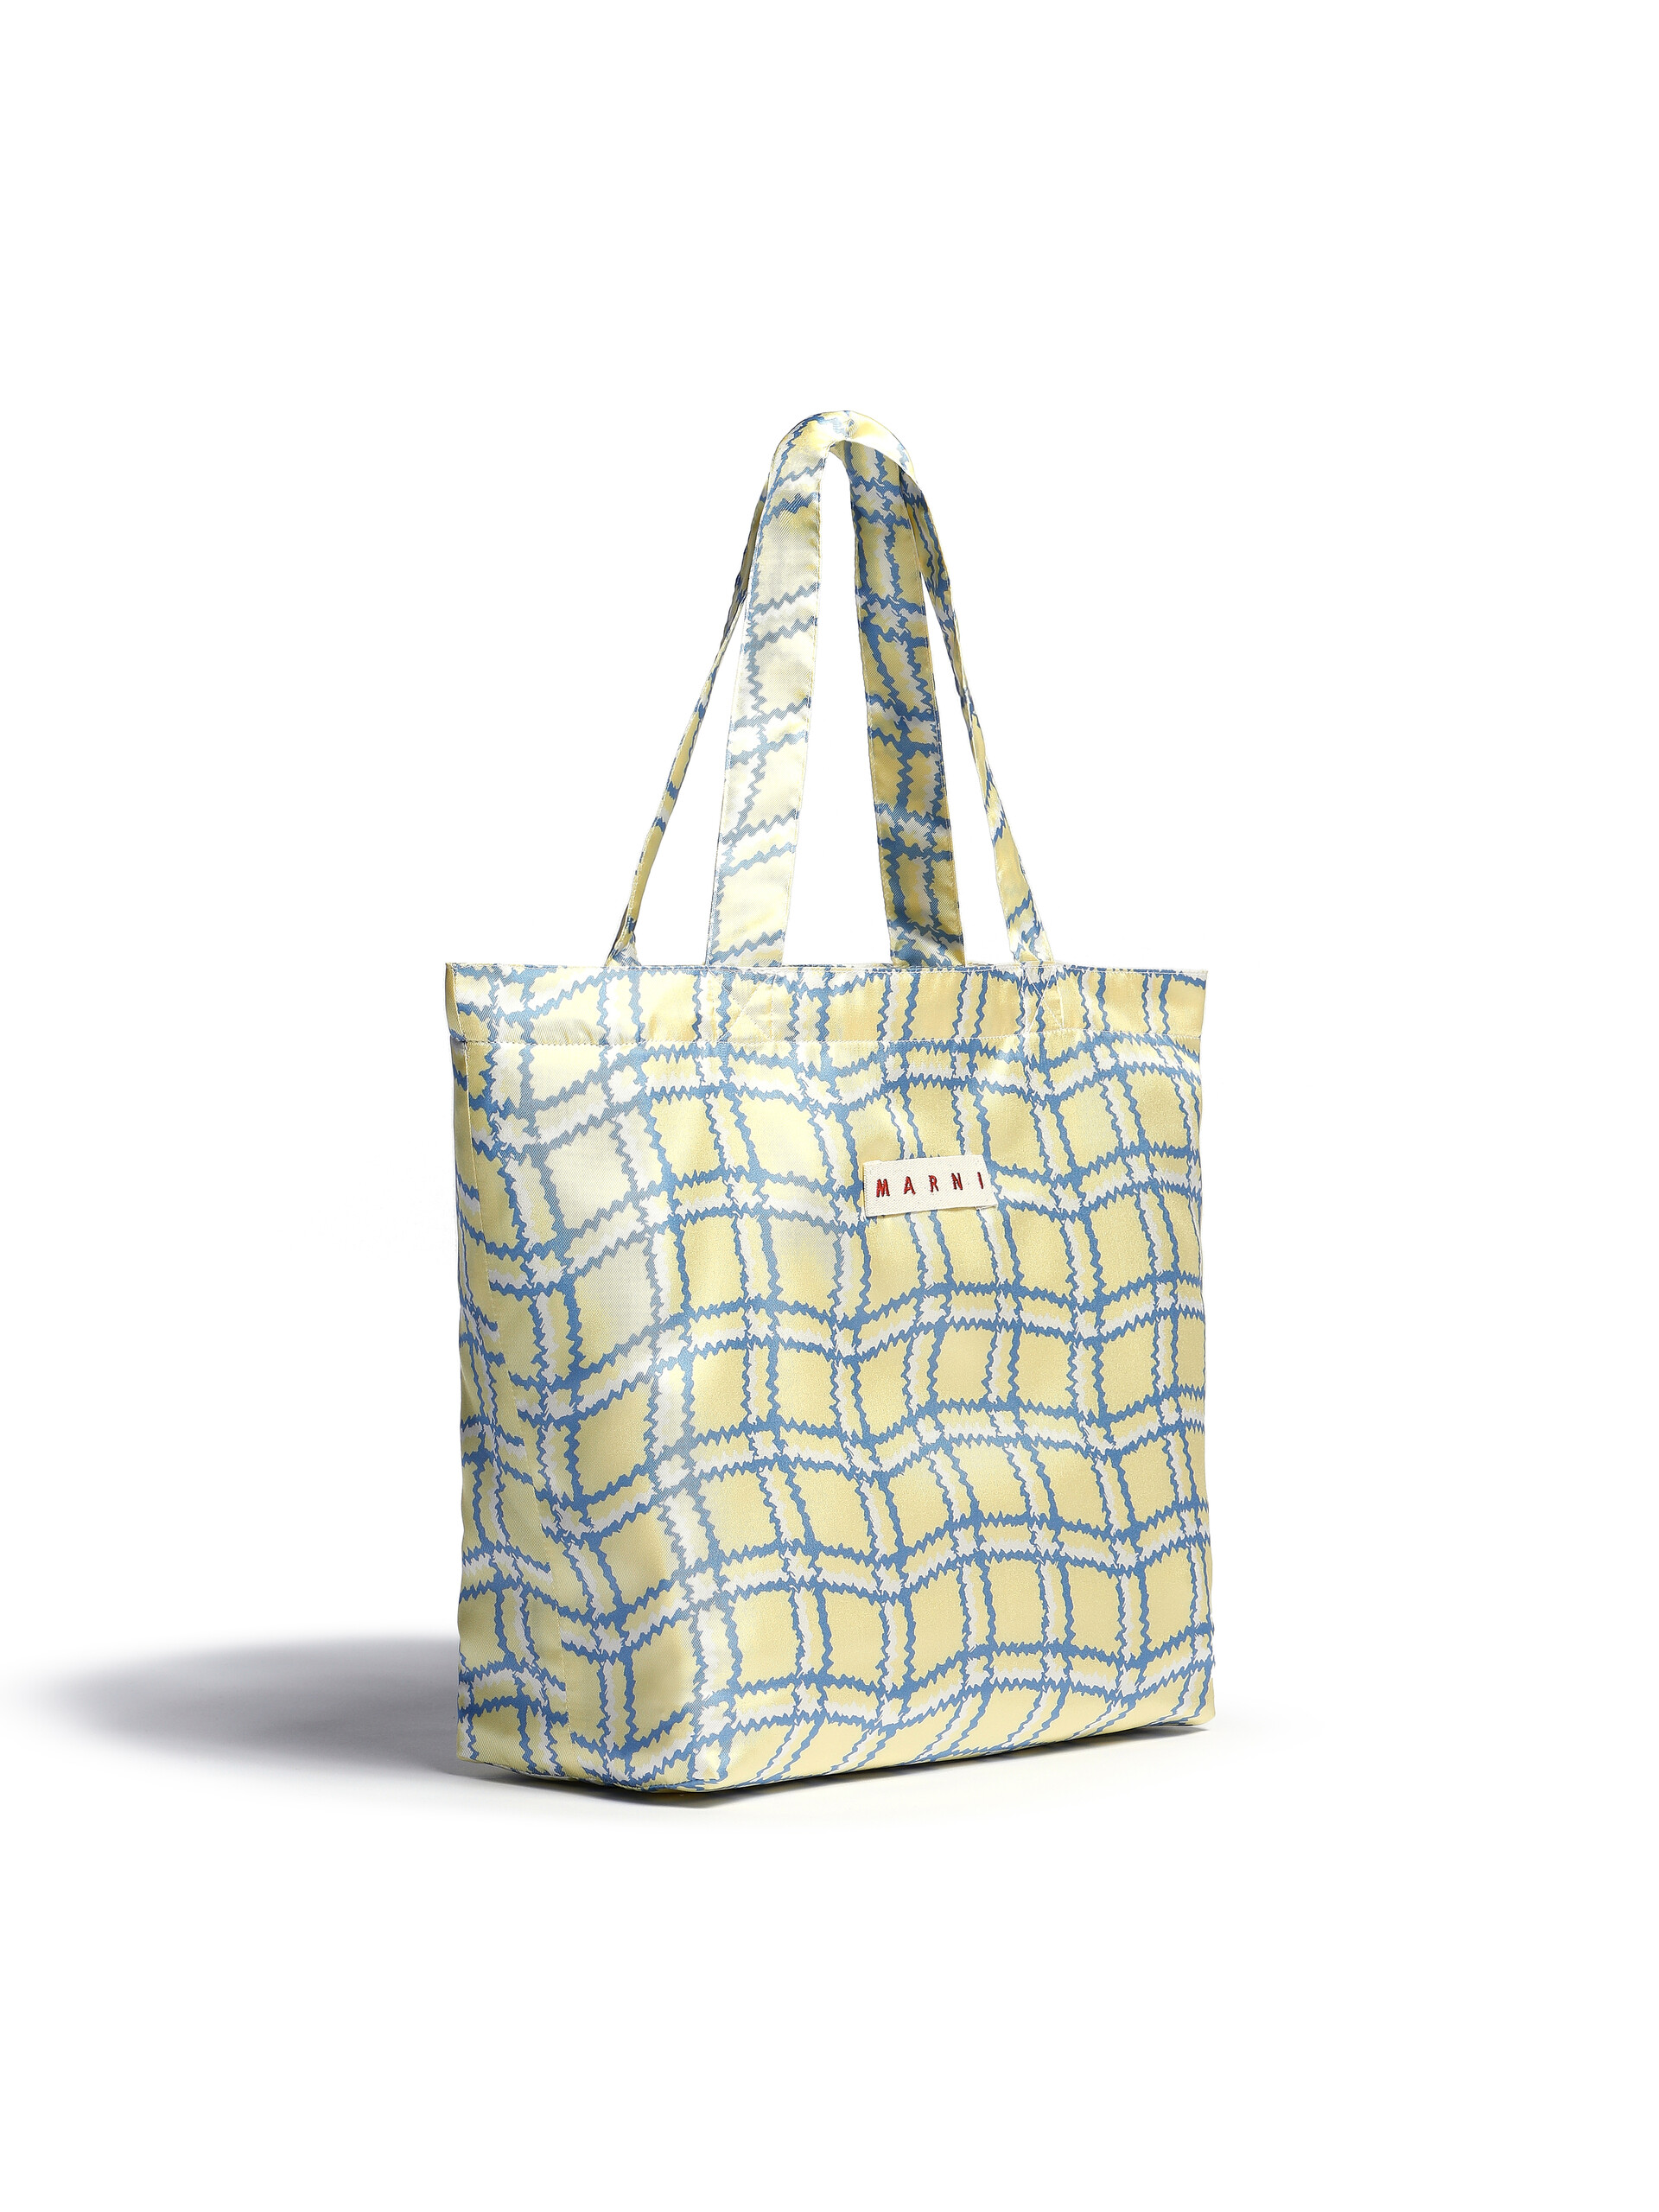 Yellow silk tote bag with archival check print - Shopping Bags - Image 2